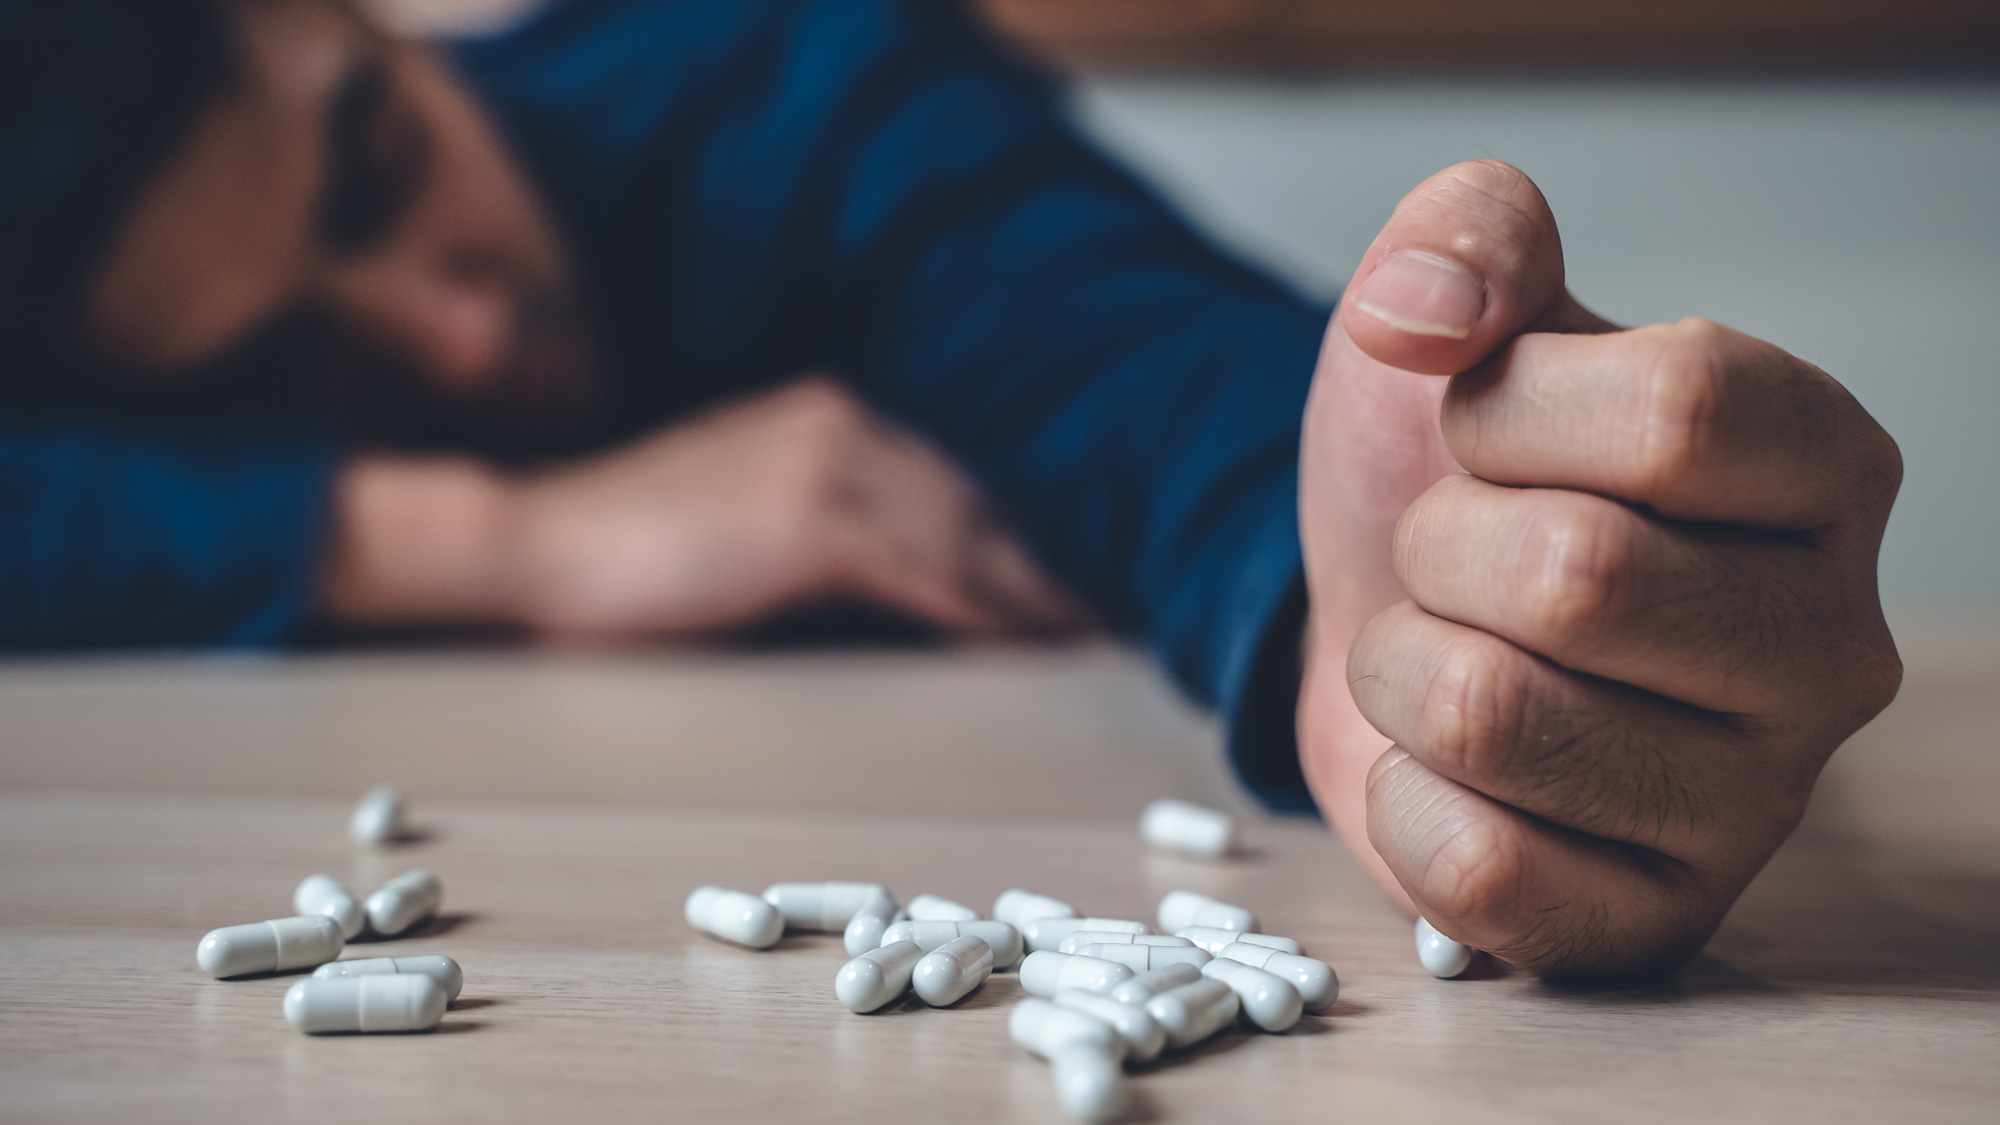 the person using drug overdoses lying on the table. close up on pills in hand.